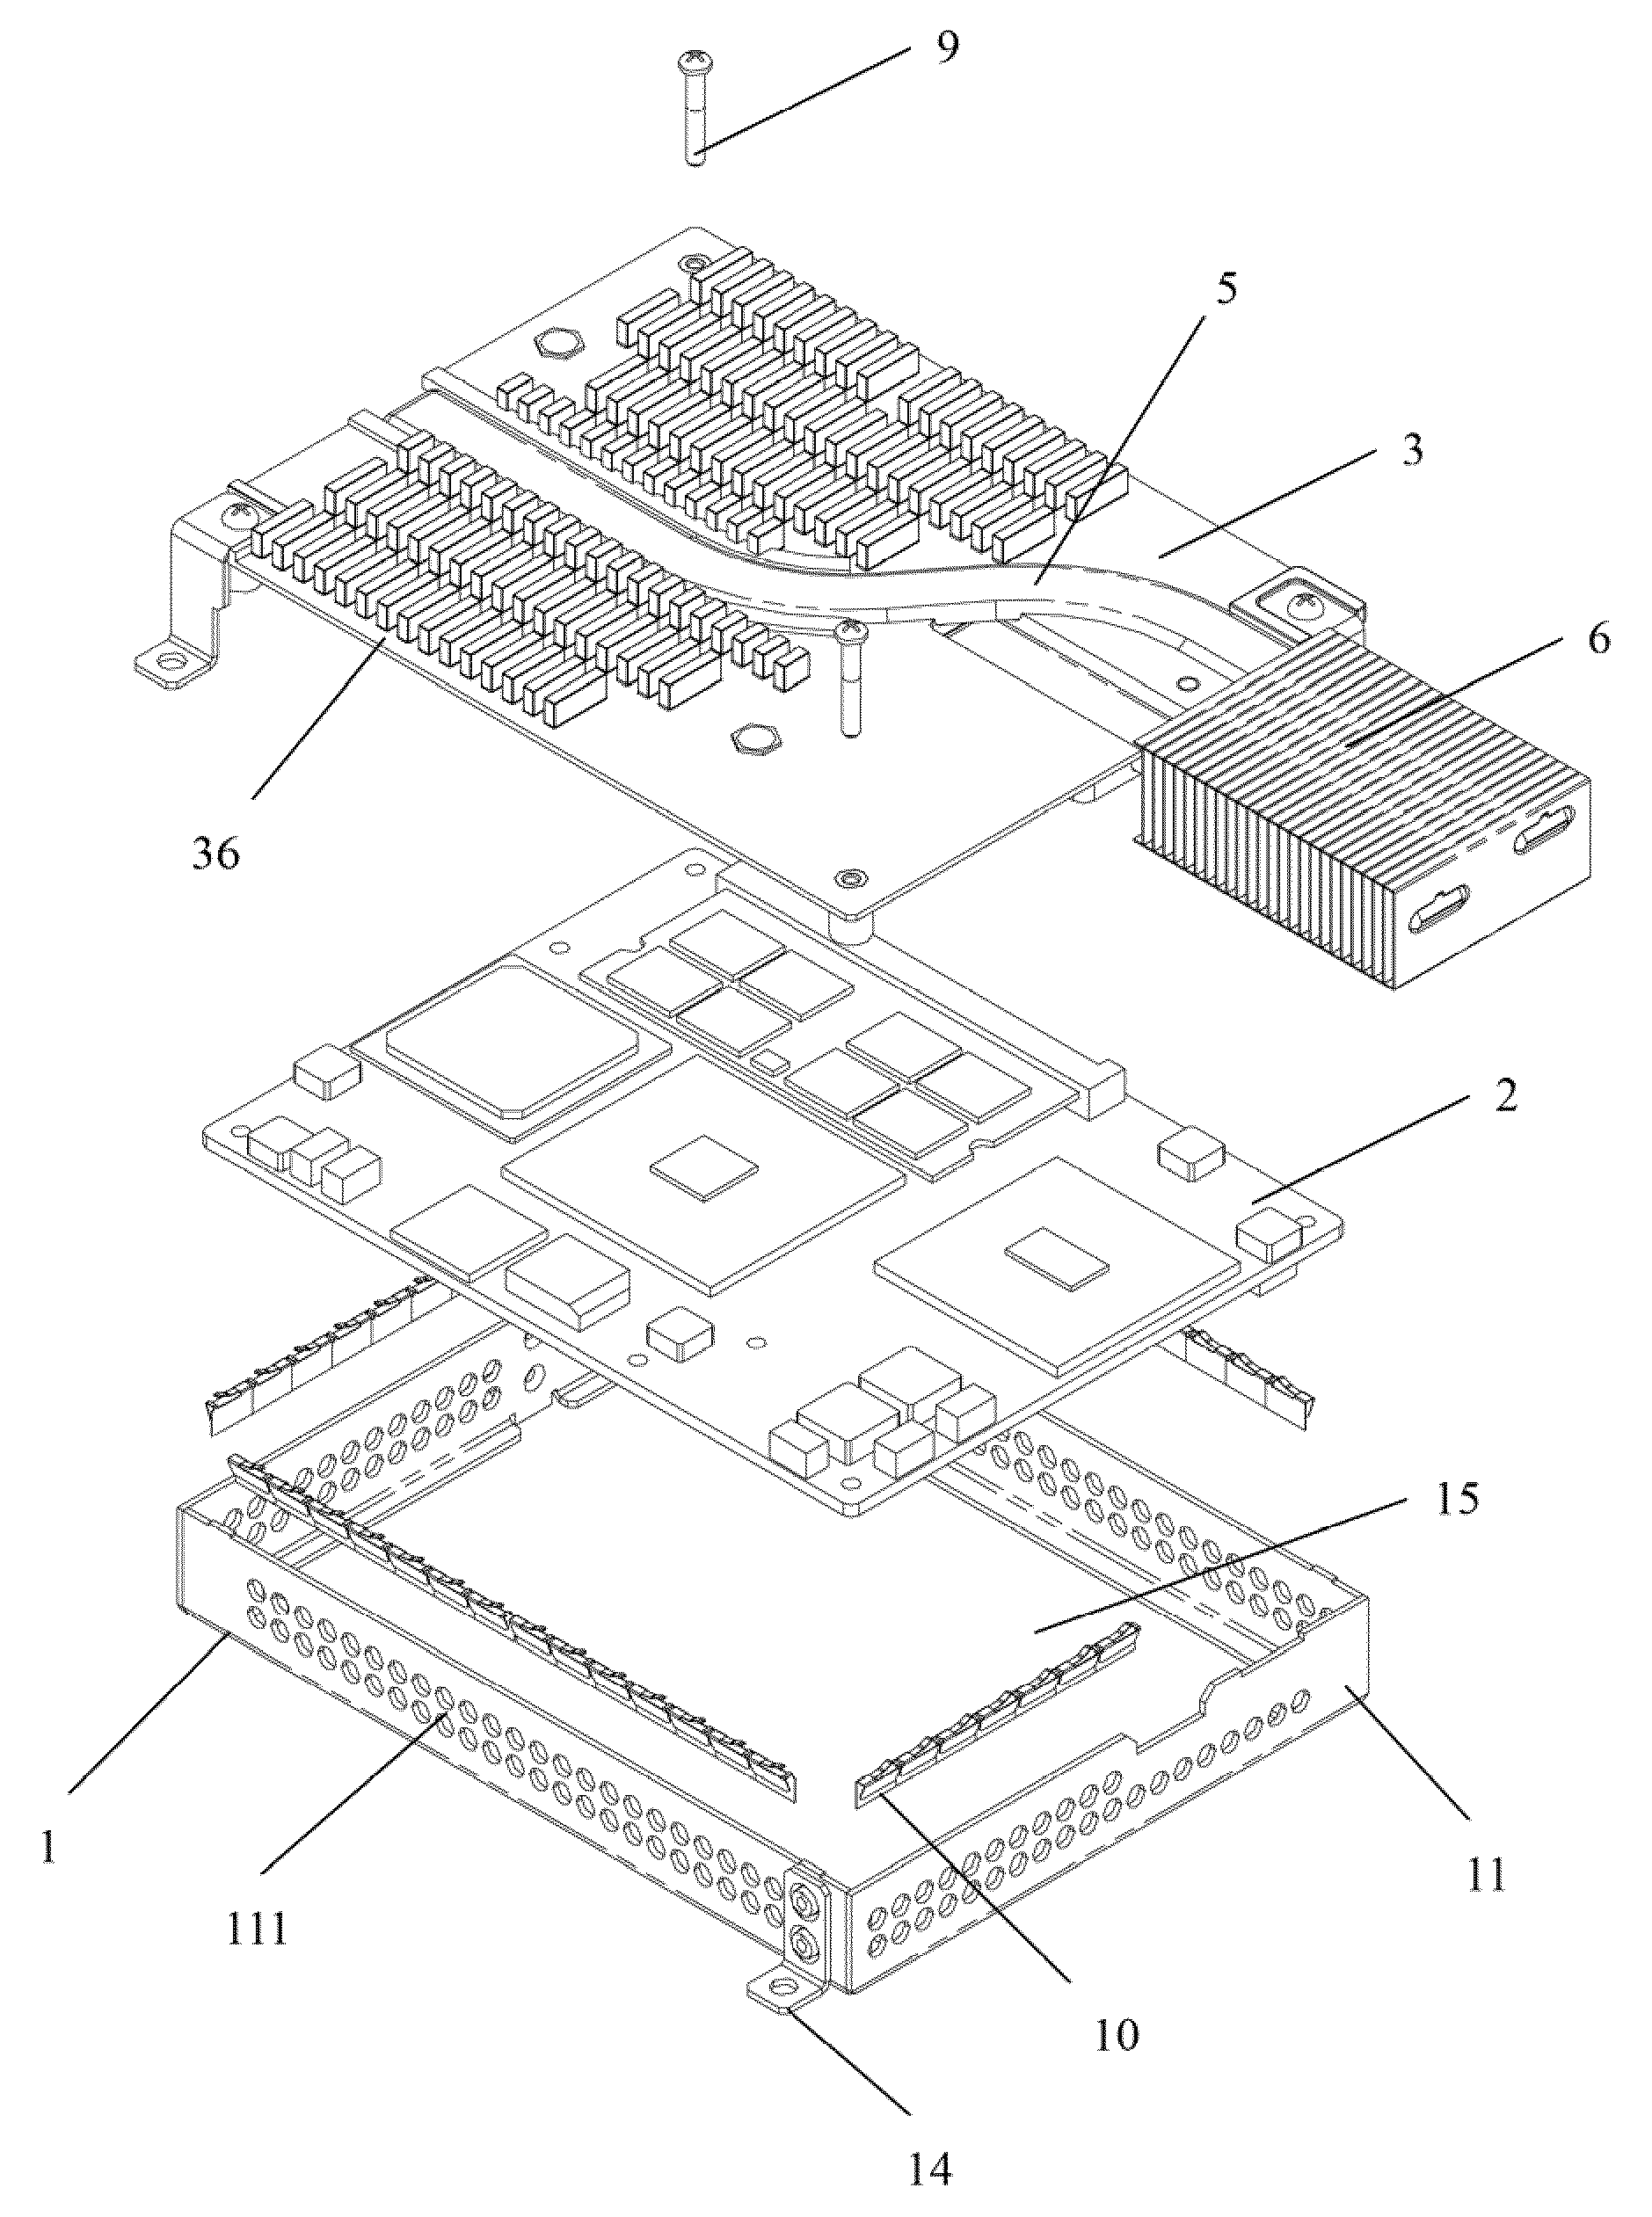 Shielded and insulated heat removing system